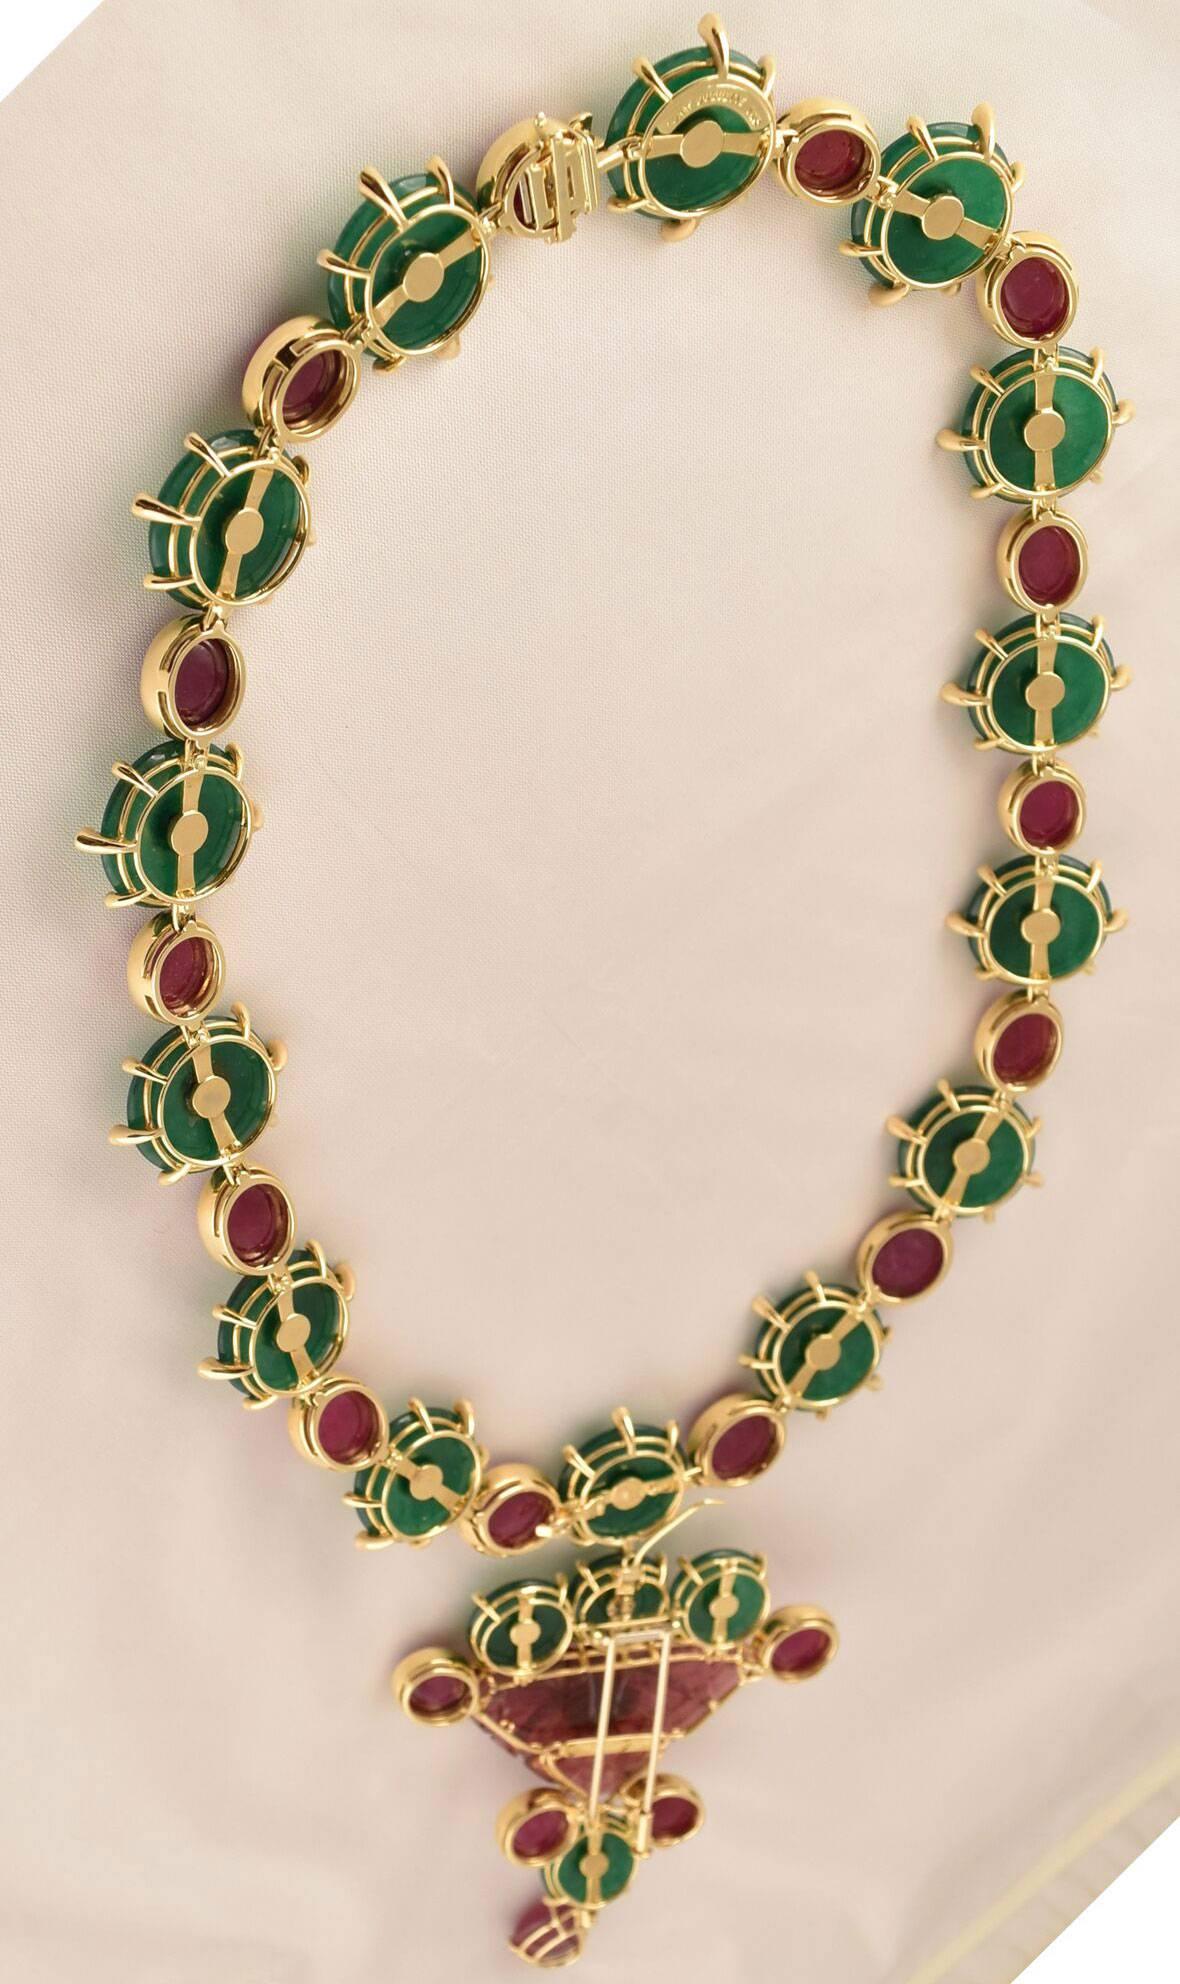 Beautiful Ruby, Star Ruby, Agate and Diamond Statement Necklace, hand crafted in 18k Gold by Tony Duquette, Designer Extraordinaire! Cabochon Ruby (app. 166ct); Cabochon Star Ruby (app. 35ct); dyed Agate (app. 160ct); Diamond (app. 1.309ct); with